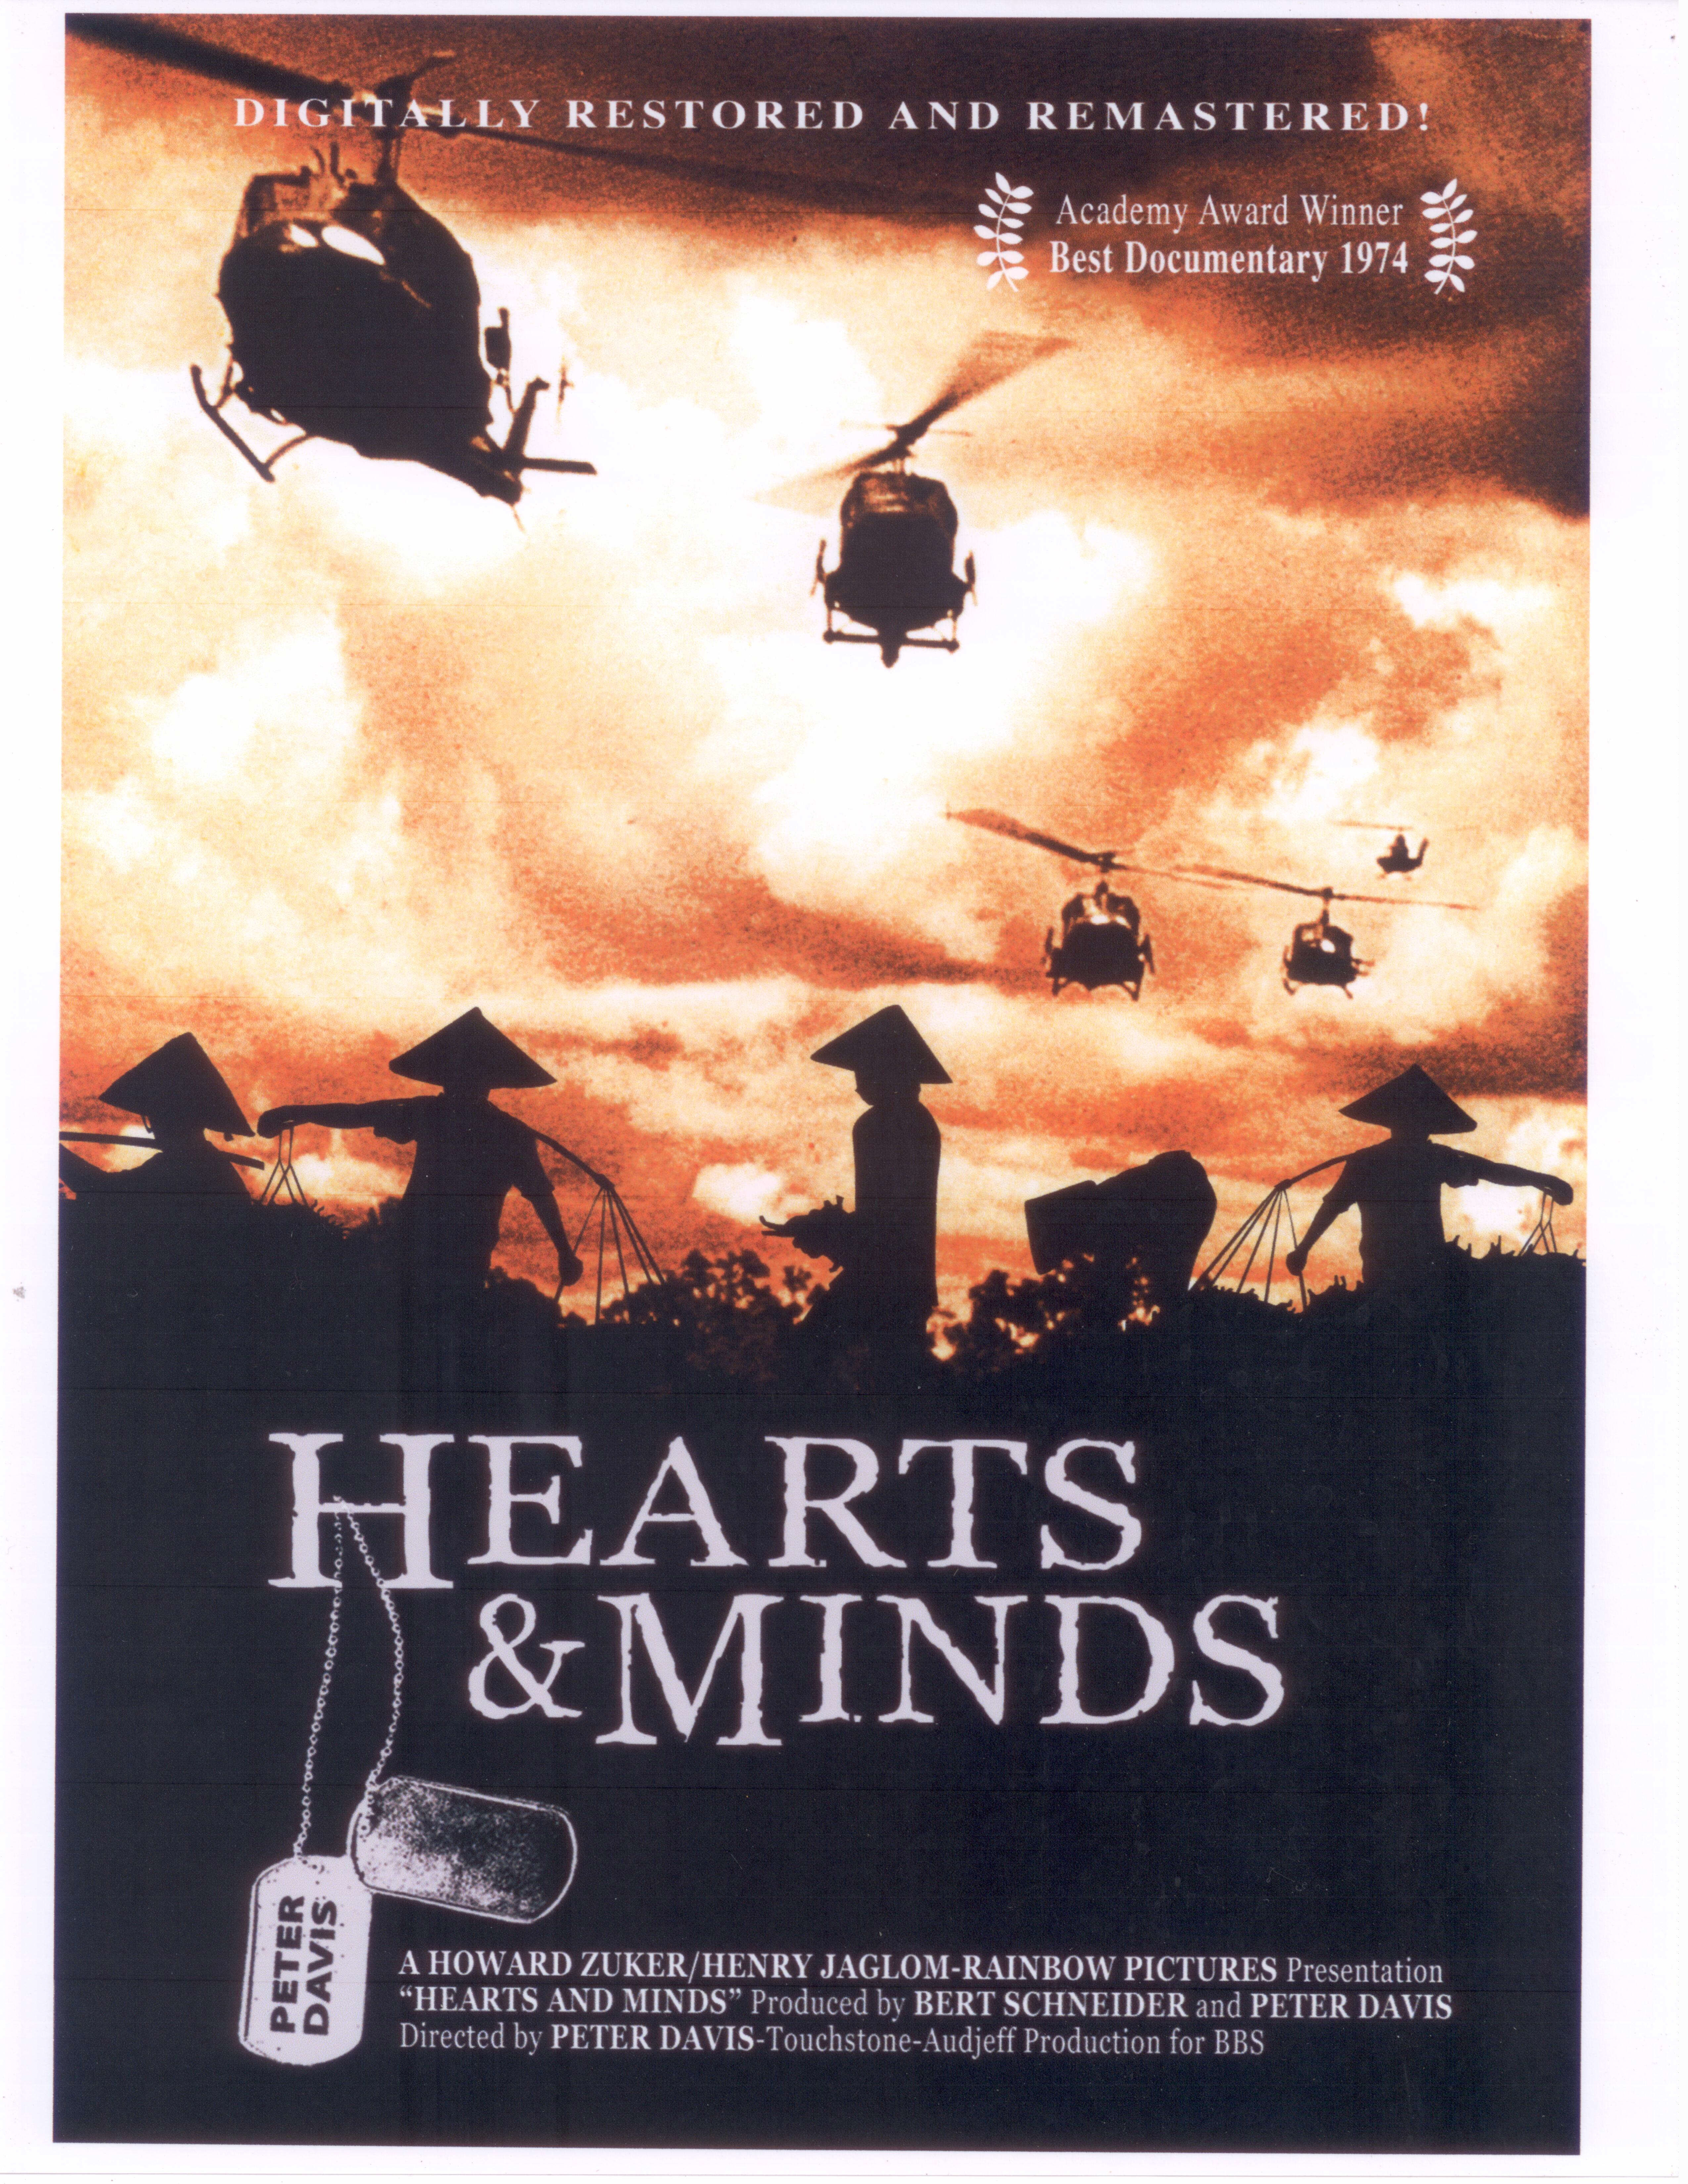 Hearts And Minds [BBS Productions/Rainbow Releasing/Criterion], directed by Peter Davis, produced by Peter Davis/Bert Schneider/Henry Lange, presented by Howard Zuker and Henry Jaglom. Winner Academy Award Best Documentary Feature 1974